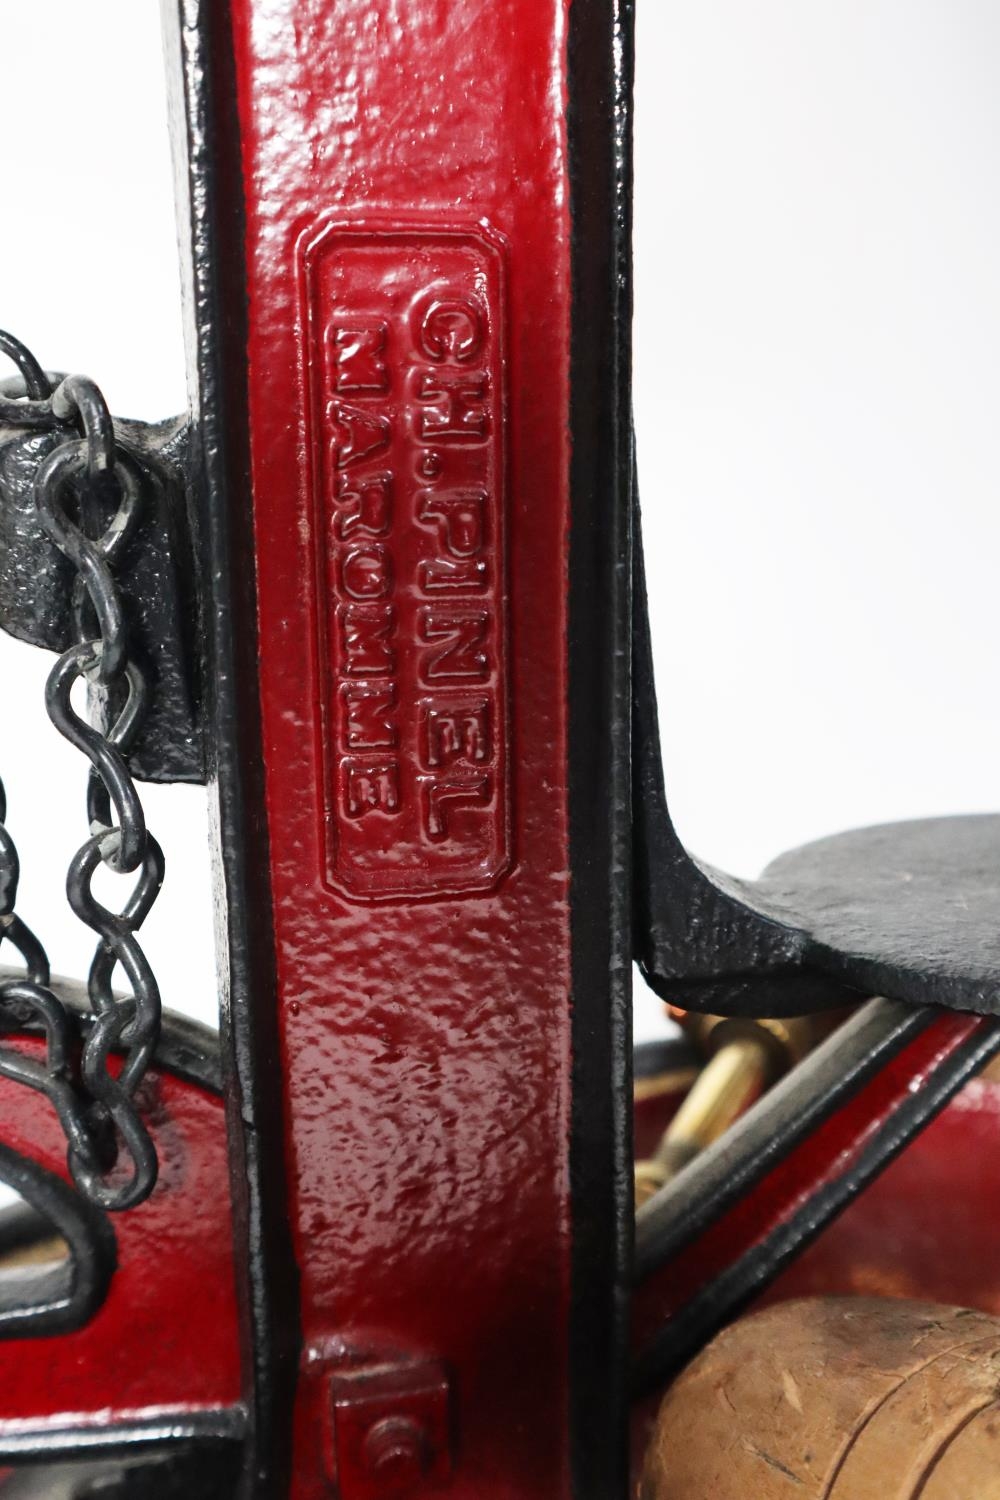 ‘CHARLES PINEL, FONDERIE DE MAROMME’ FRENCH VINTAGE MAROON AND BLACK PAINTED HAND OPERATED CAST IRON - Image 4 of 4